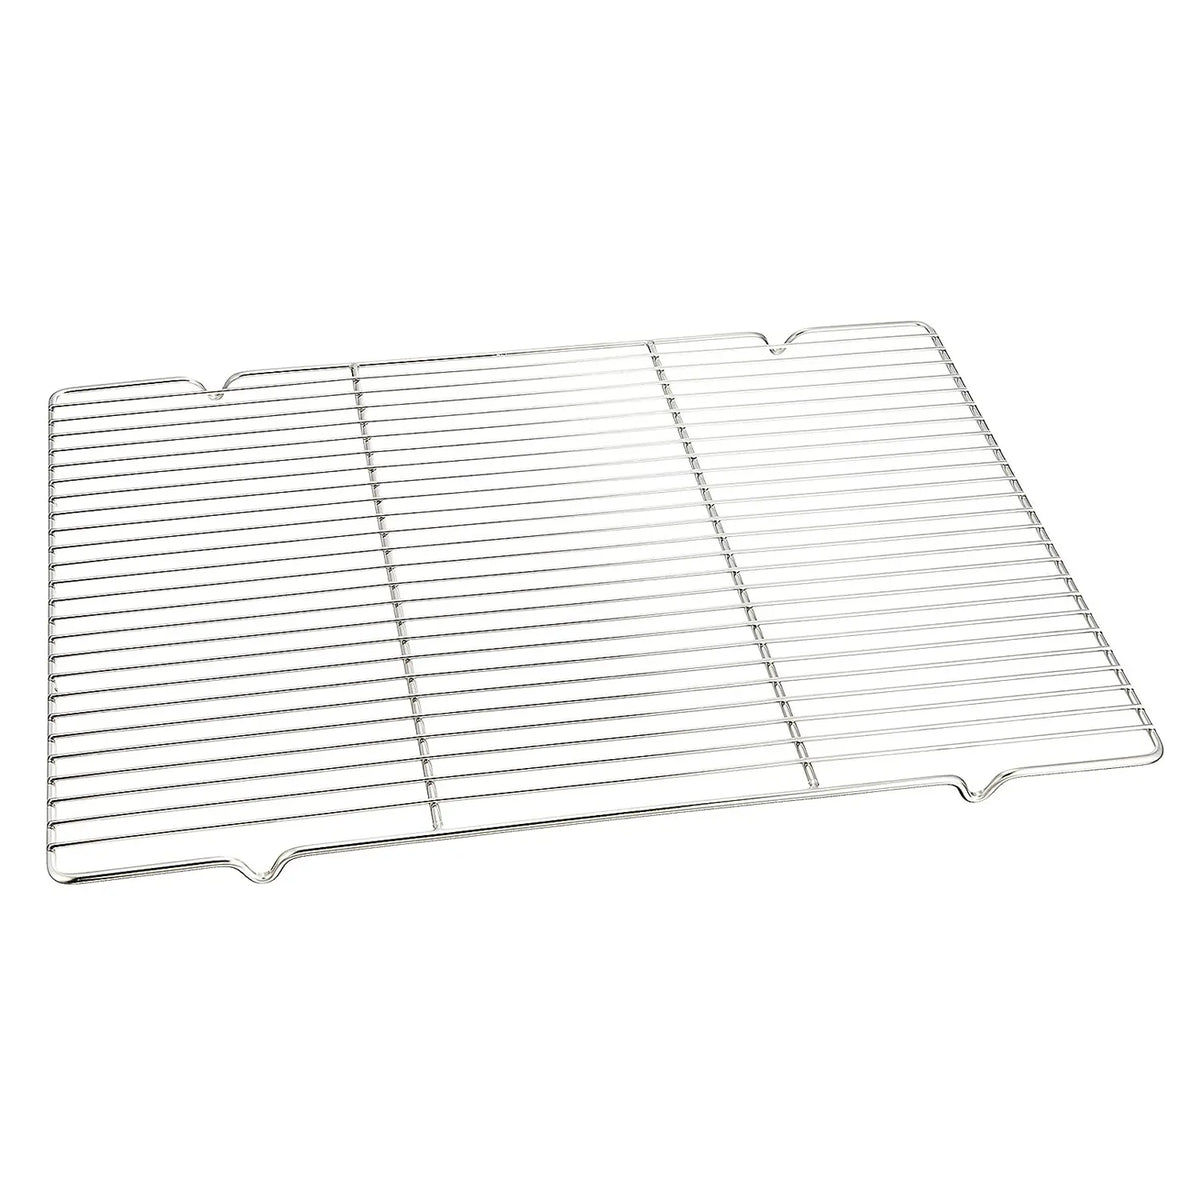 EBM Stainless Steel Square Cake Cooling Rack with Feet